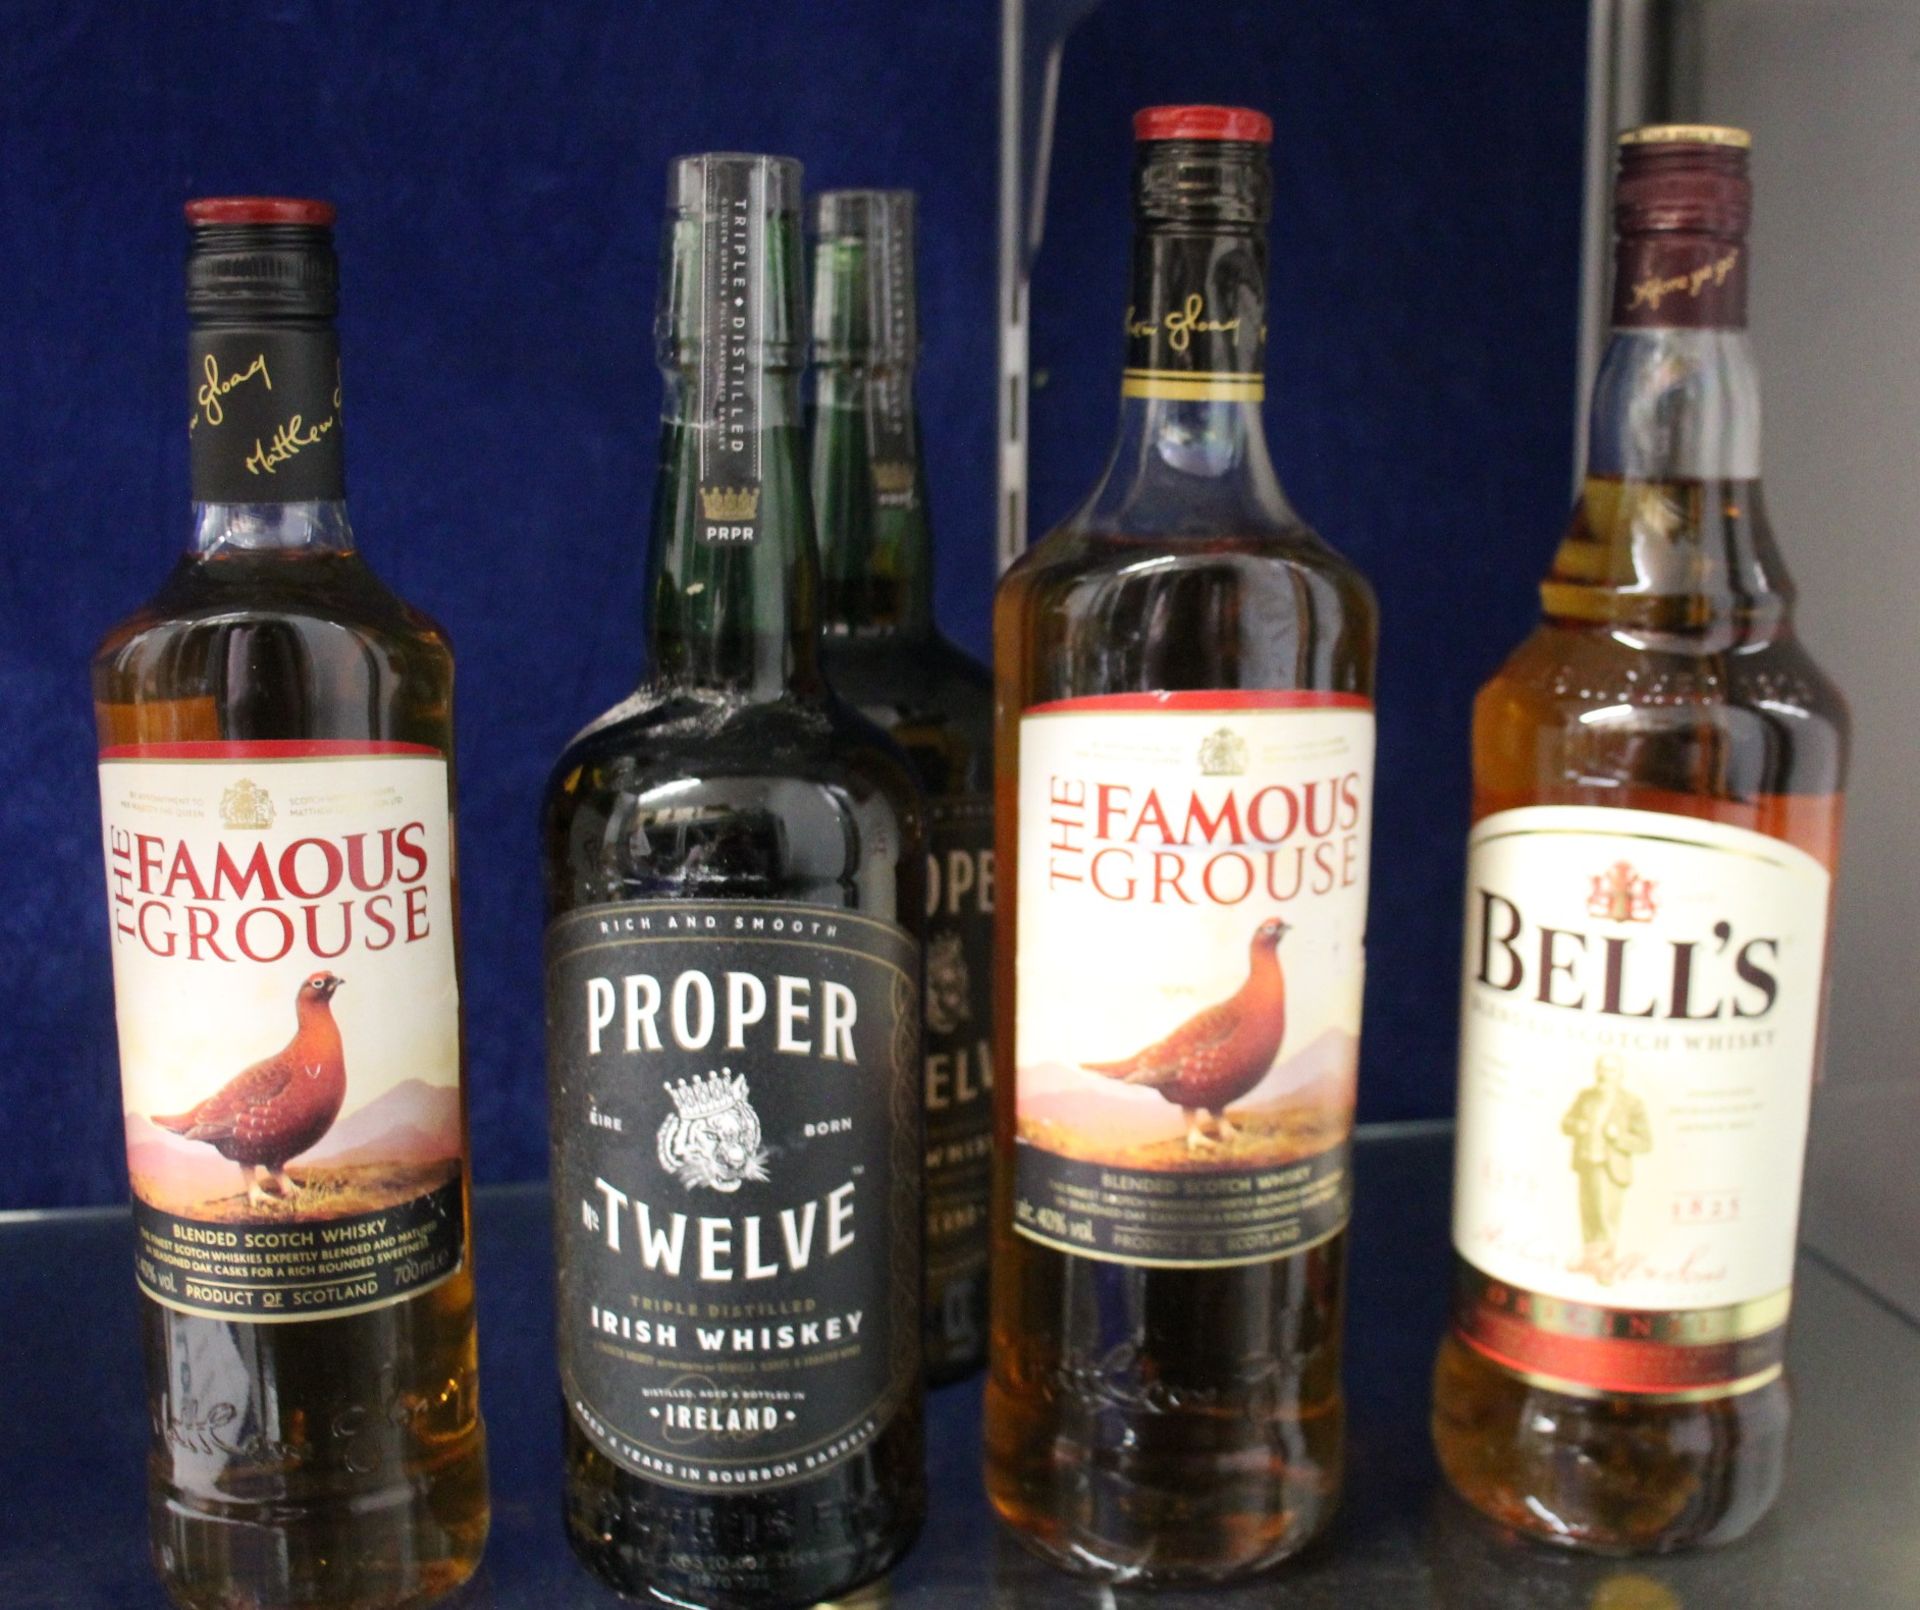 Two bottles of Famous Grouse blended Scotch whisky (1 x 700ml, 1 x 1ltr), a bottle of Bells